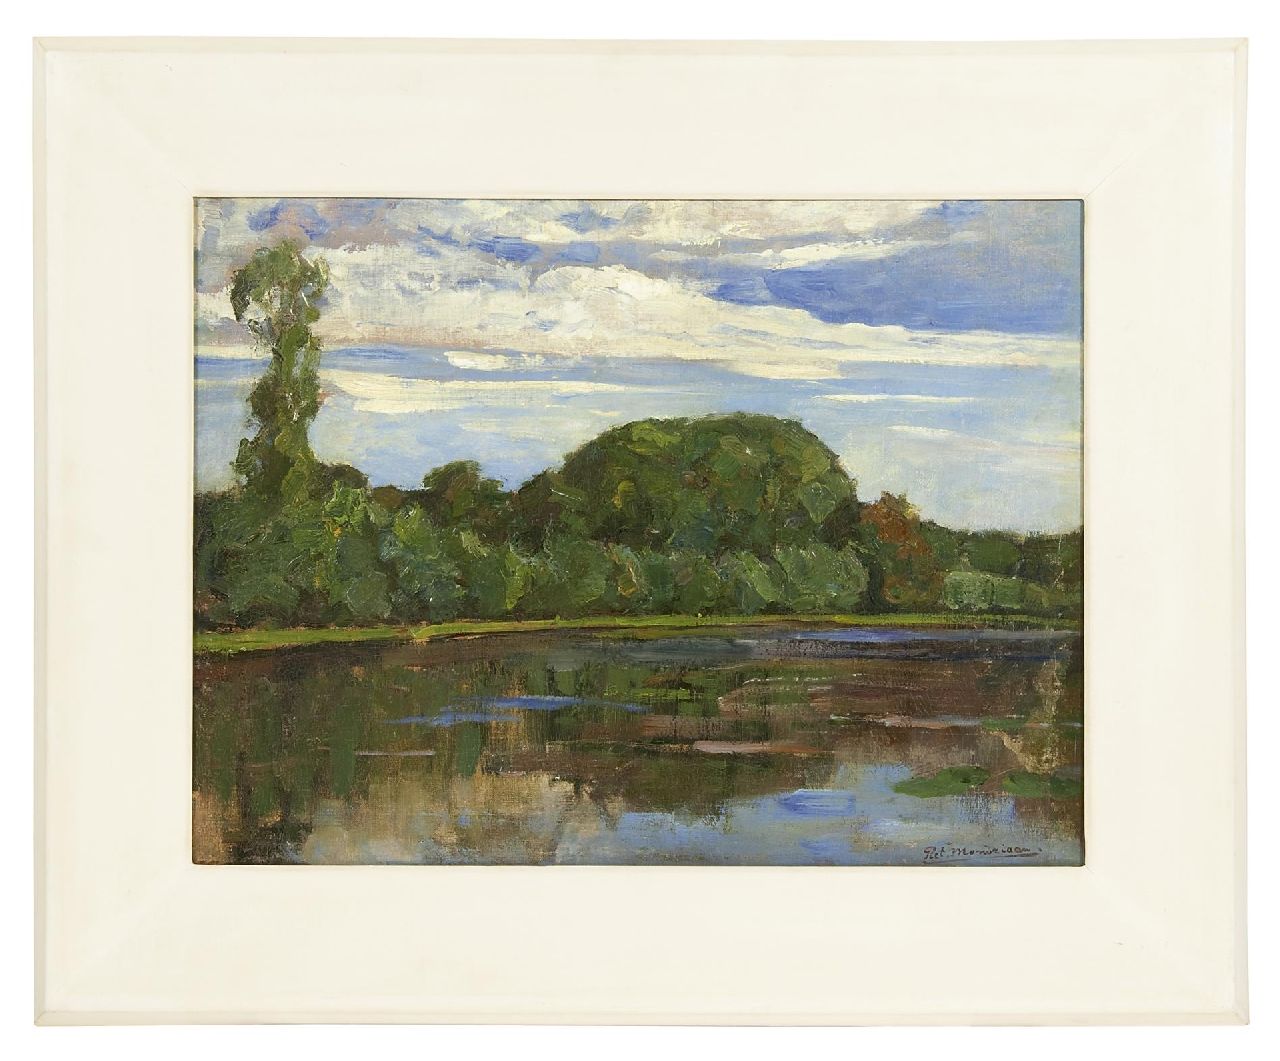 Mondriaan P.C.  | Pieter Cornelis 'Piet' Mondriaan | Paintings offered for sale | Geinrust farm with Isolated Tree at left, oil on canvas 47.7 x 63.8 cm, signed l.r. and painted ca. 1905-1906